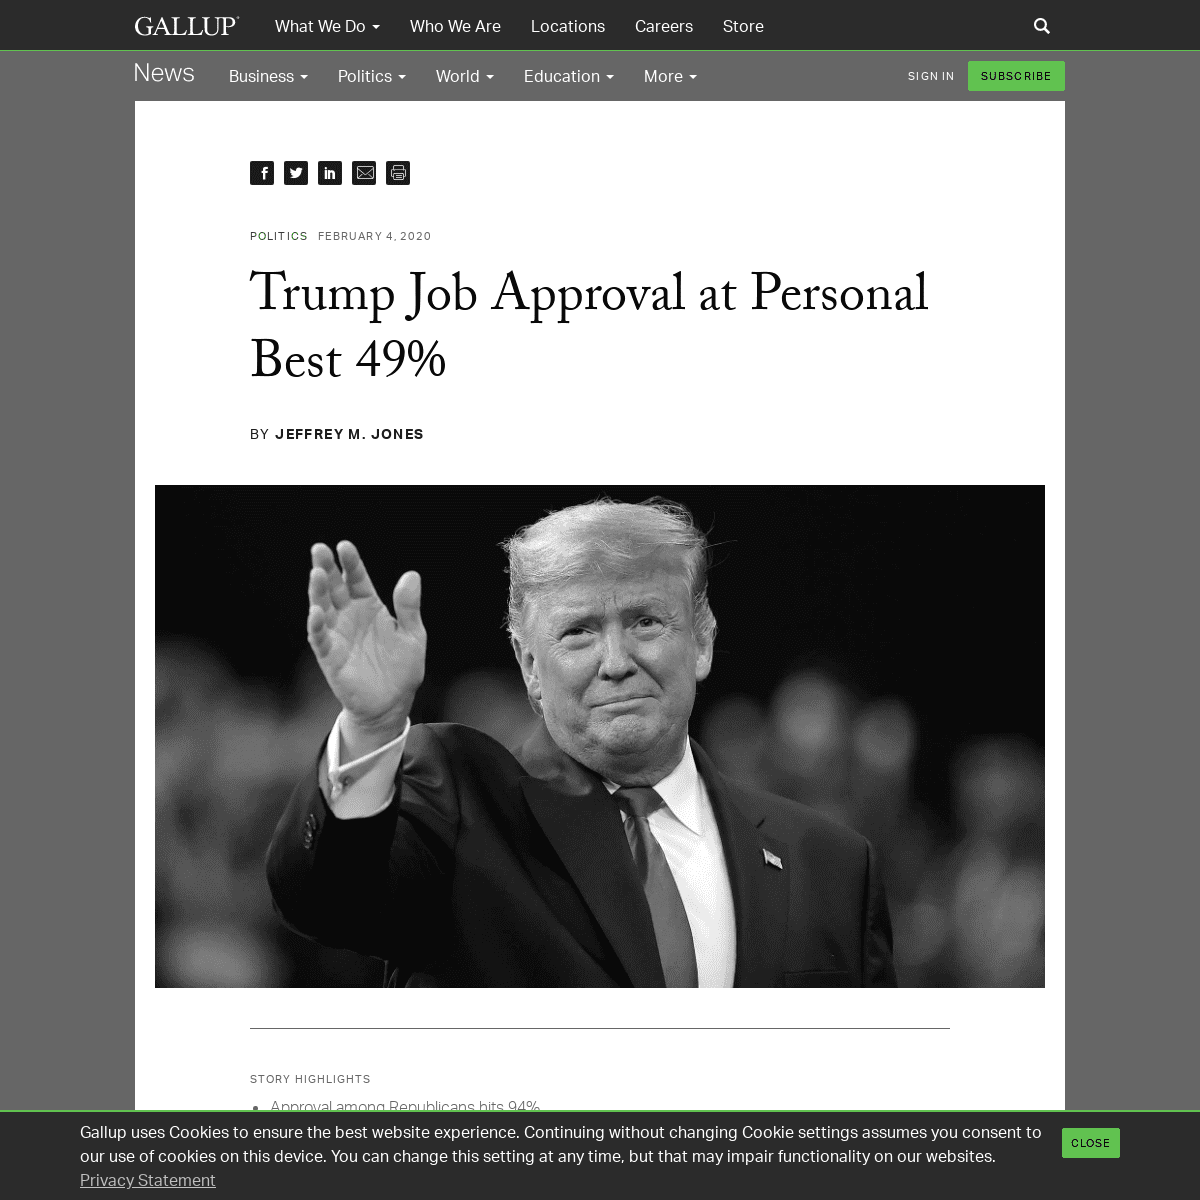 A complete backup of news.gallup.com/poll/284156/trump-job-approval-personal-best.aspx